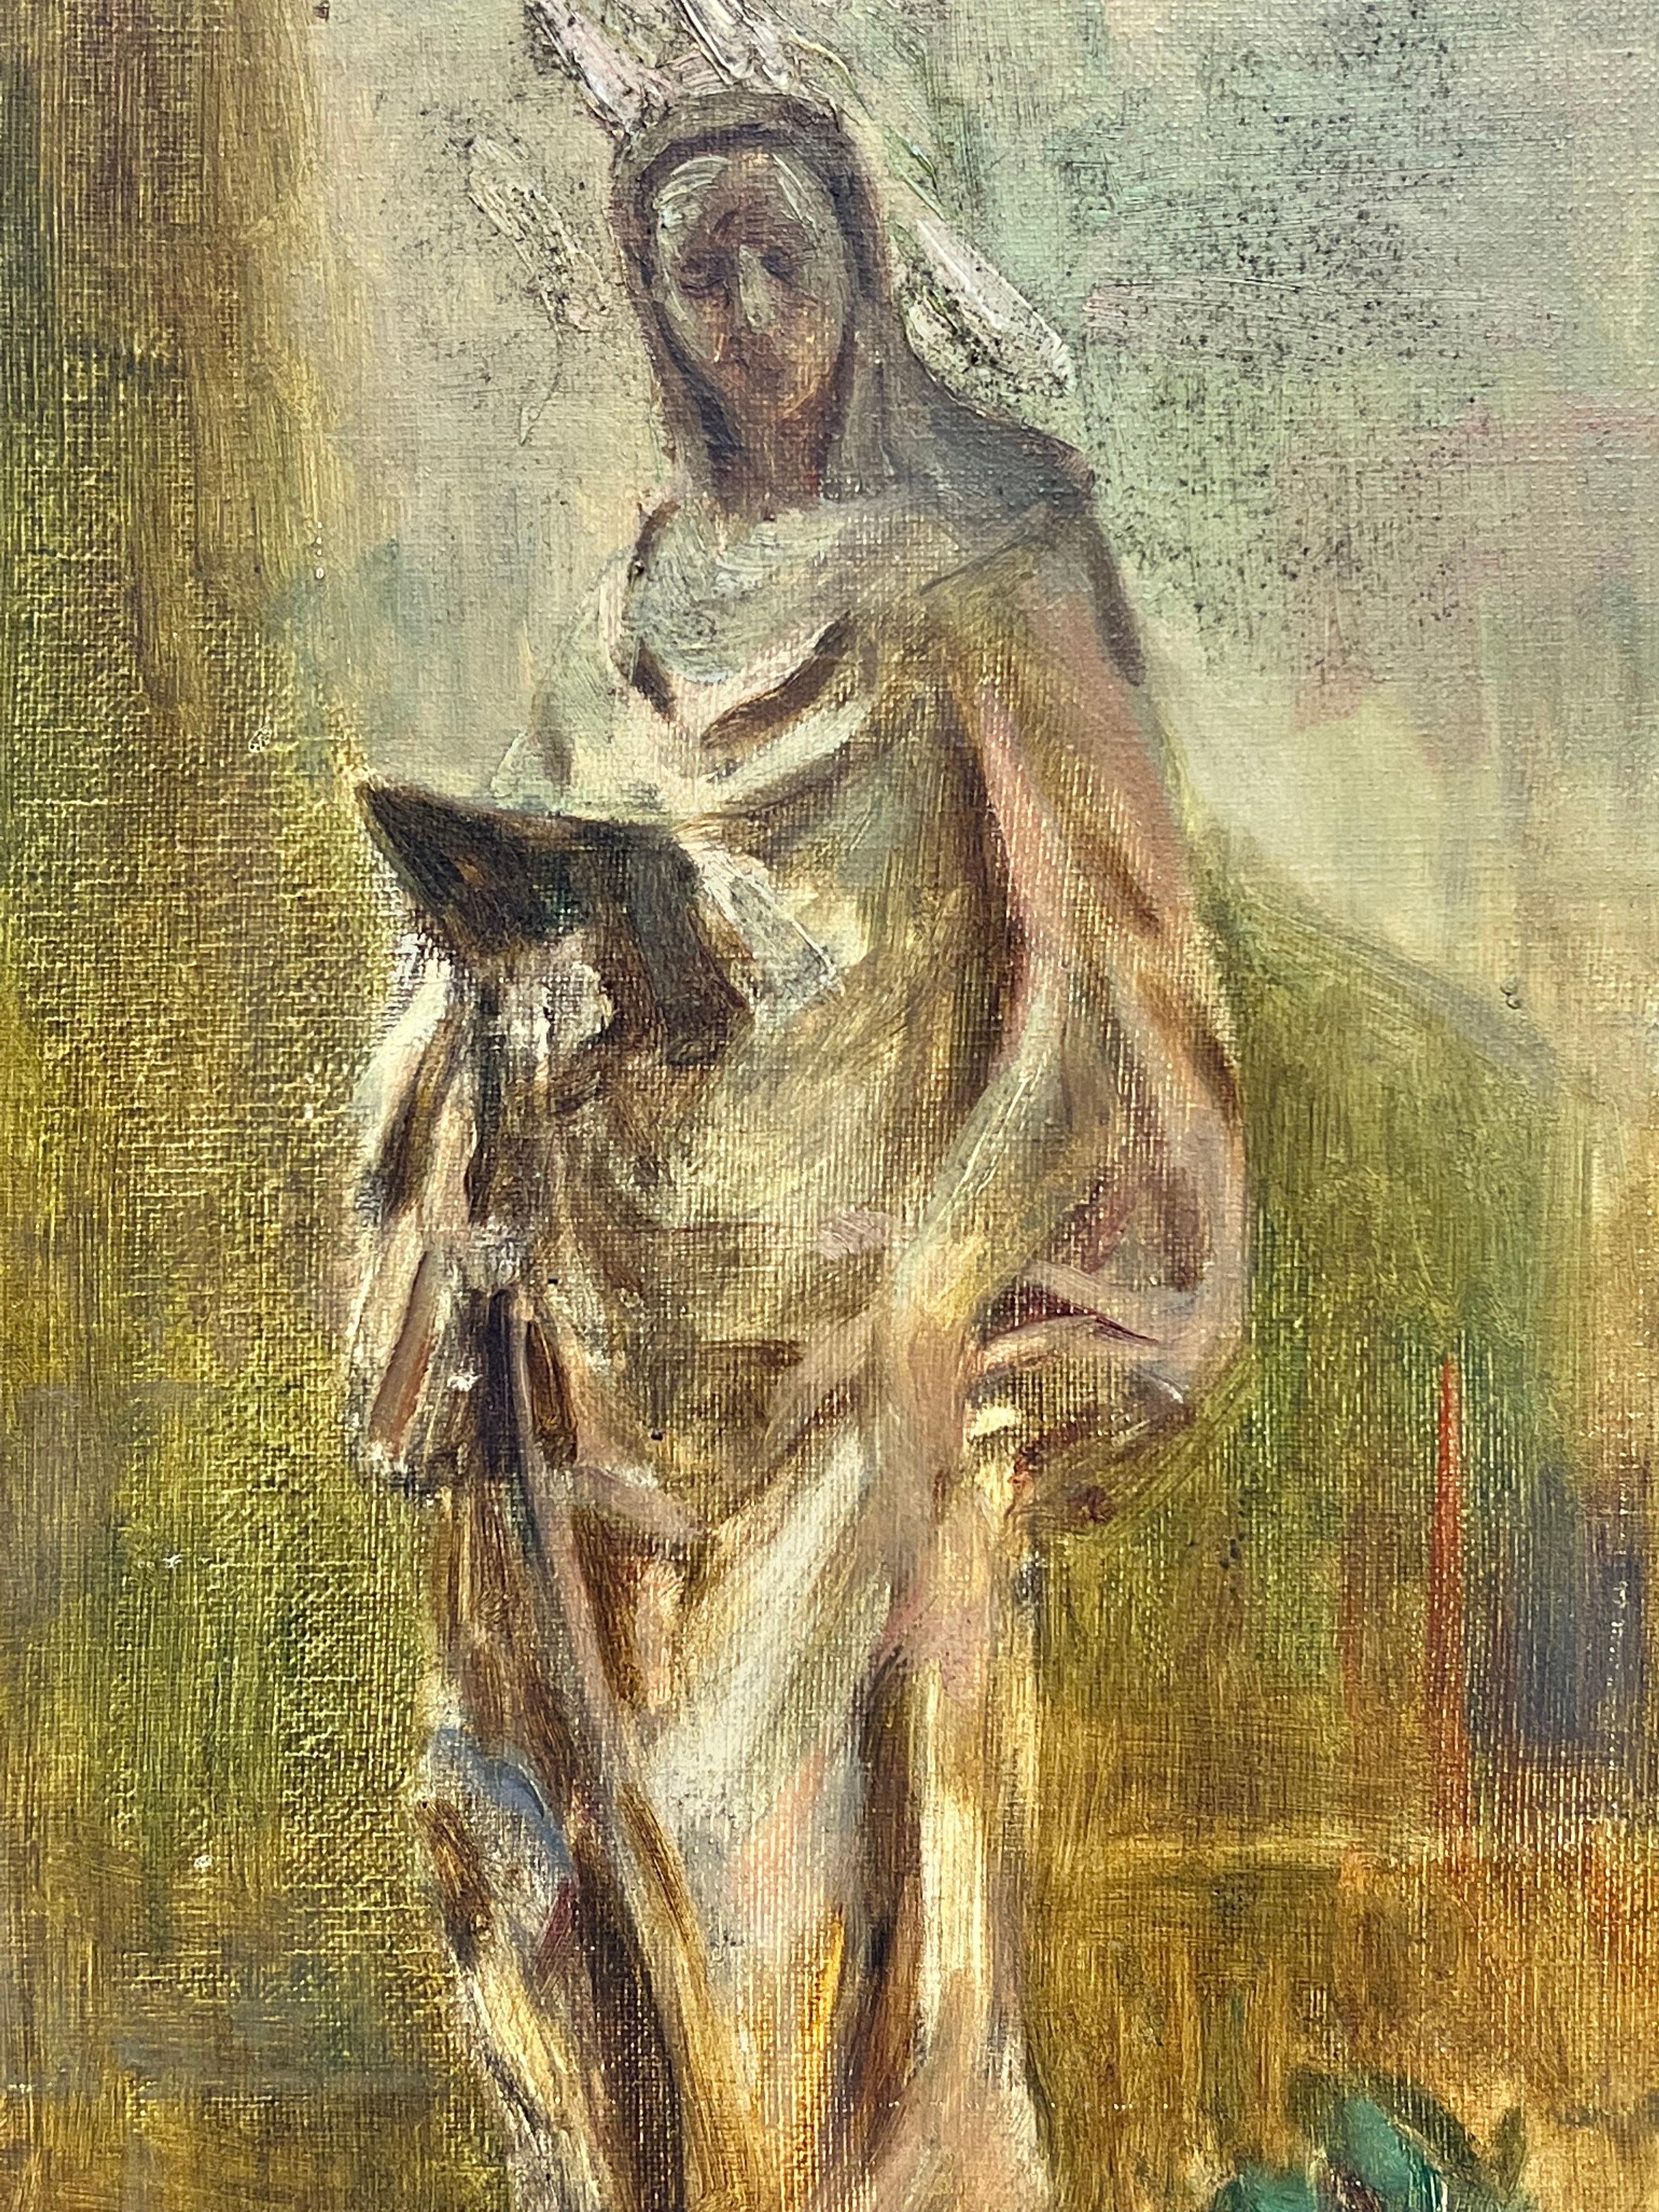 Artist/ School: French School, circa 1930, signed lower left corner

Title: Study of a stone sculpture statue standing in what looks to be a church courtyard .

Medium: oil on canvas, framed in a lovely quality wooden frame. 

Framed: 23 x 18